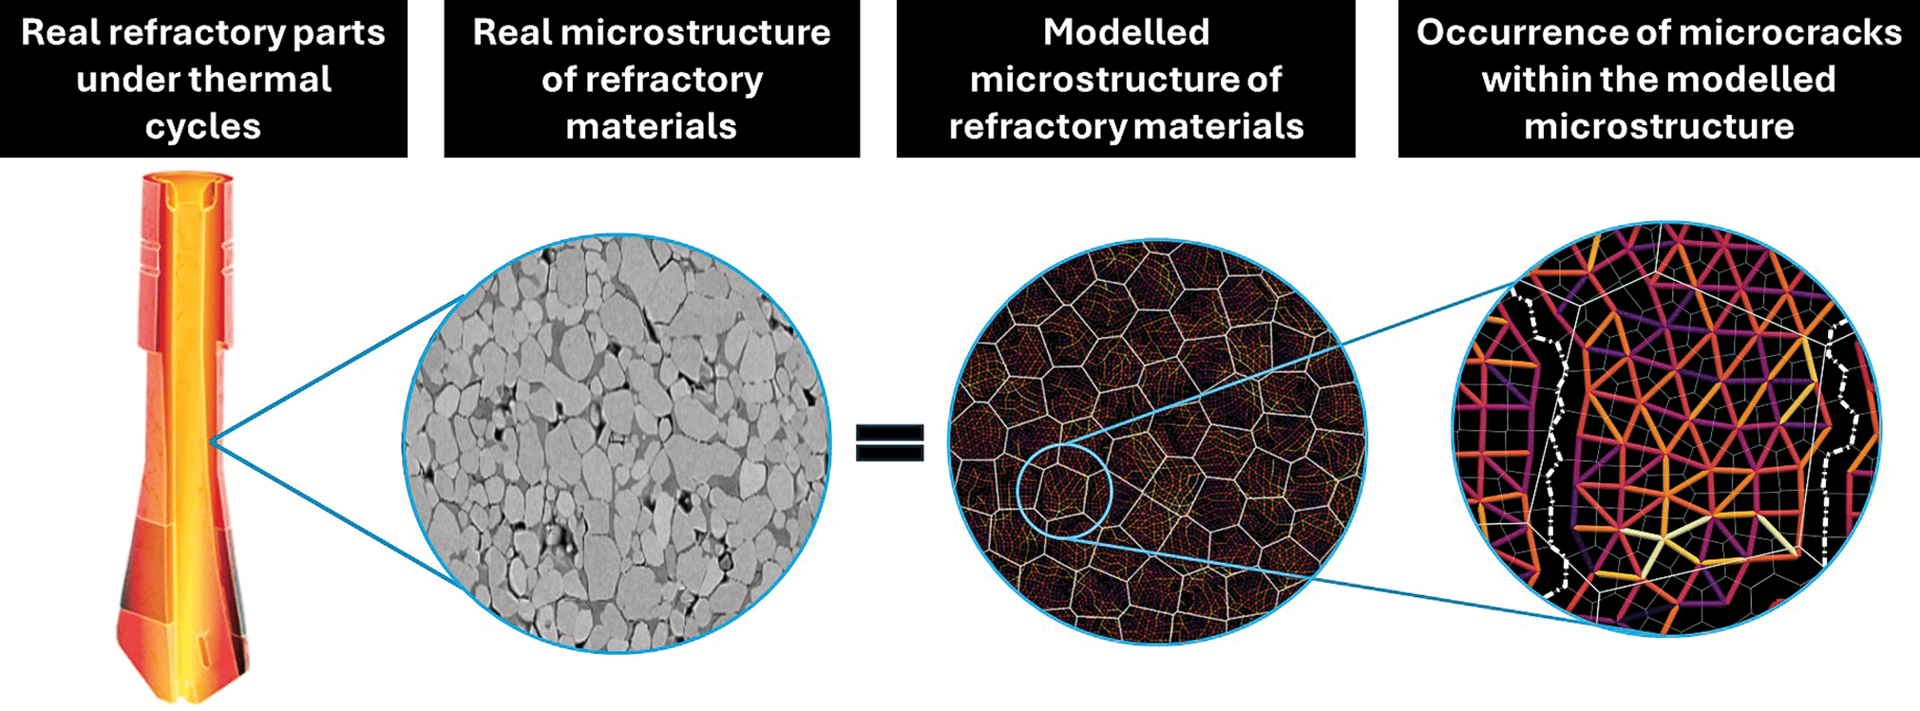 Schematic diagram showing the link between real microstructures and discrete element modeling